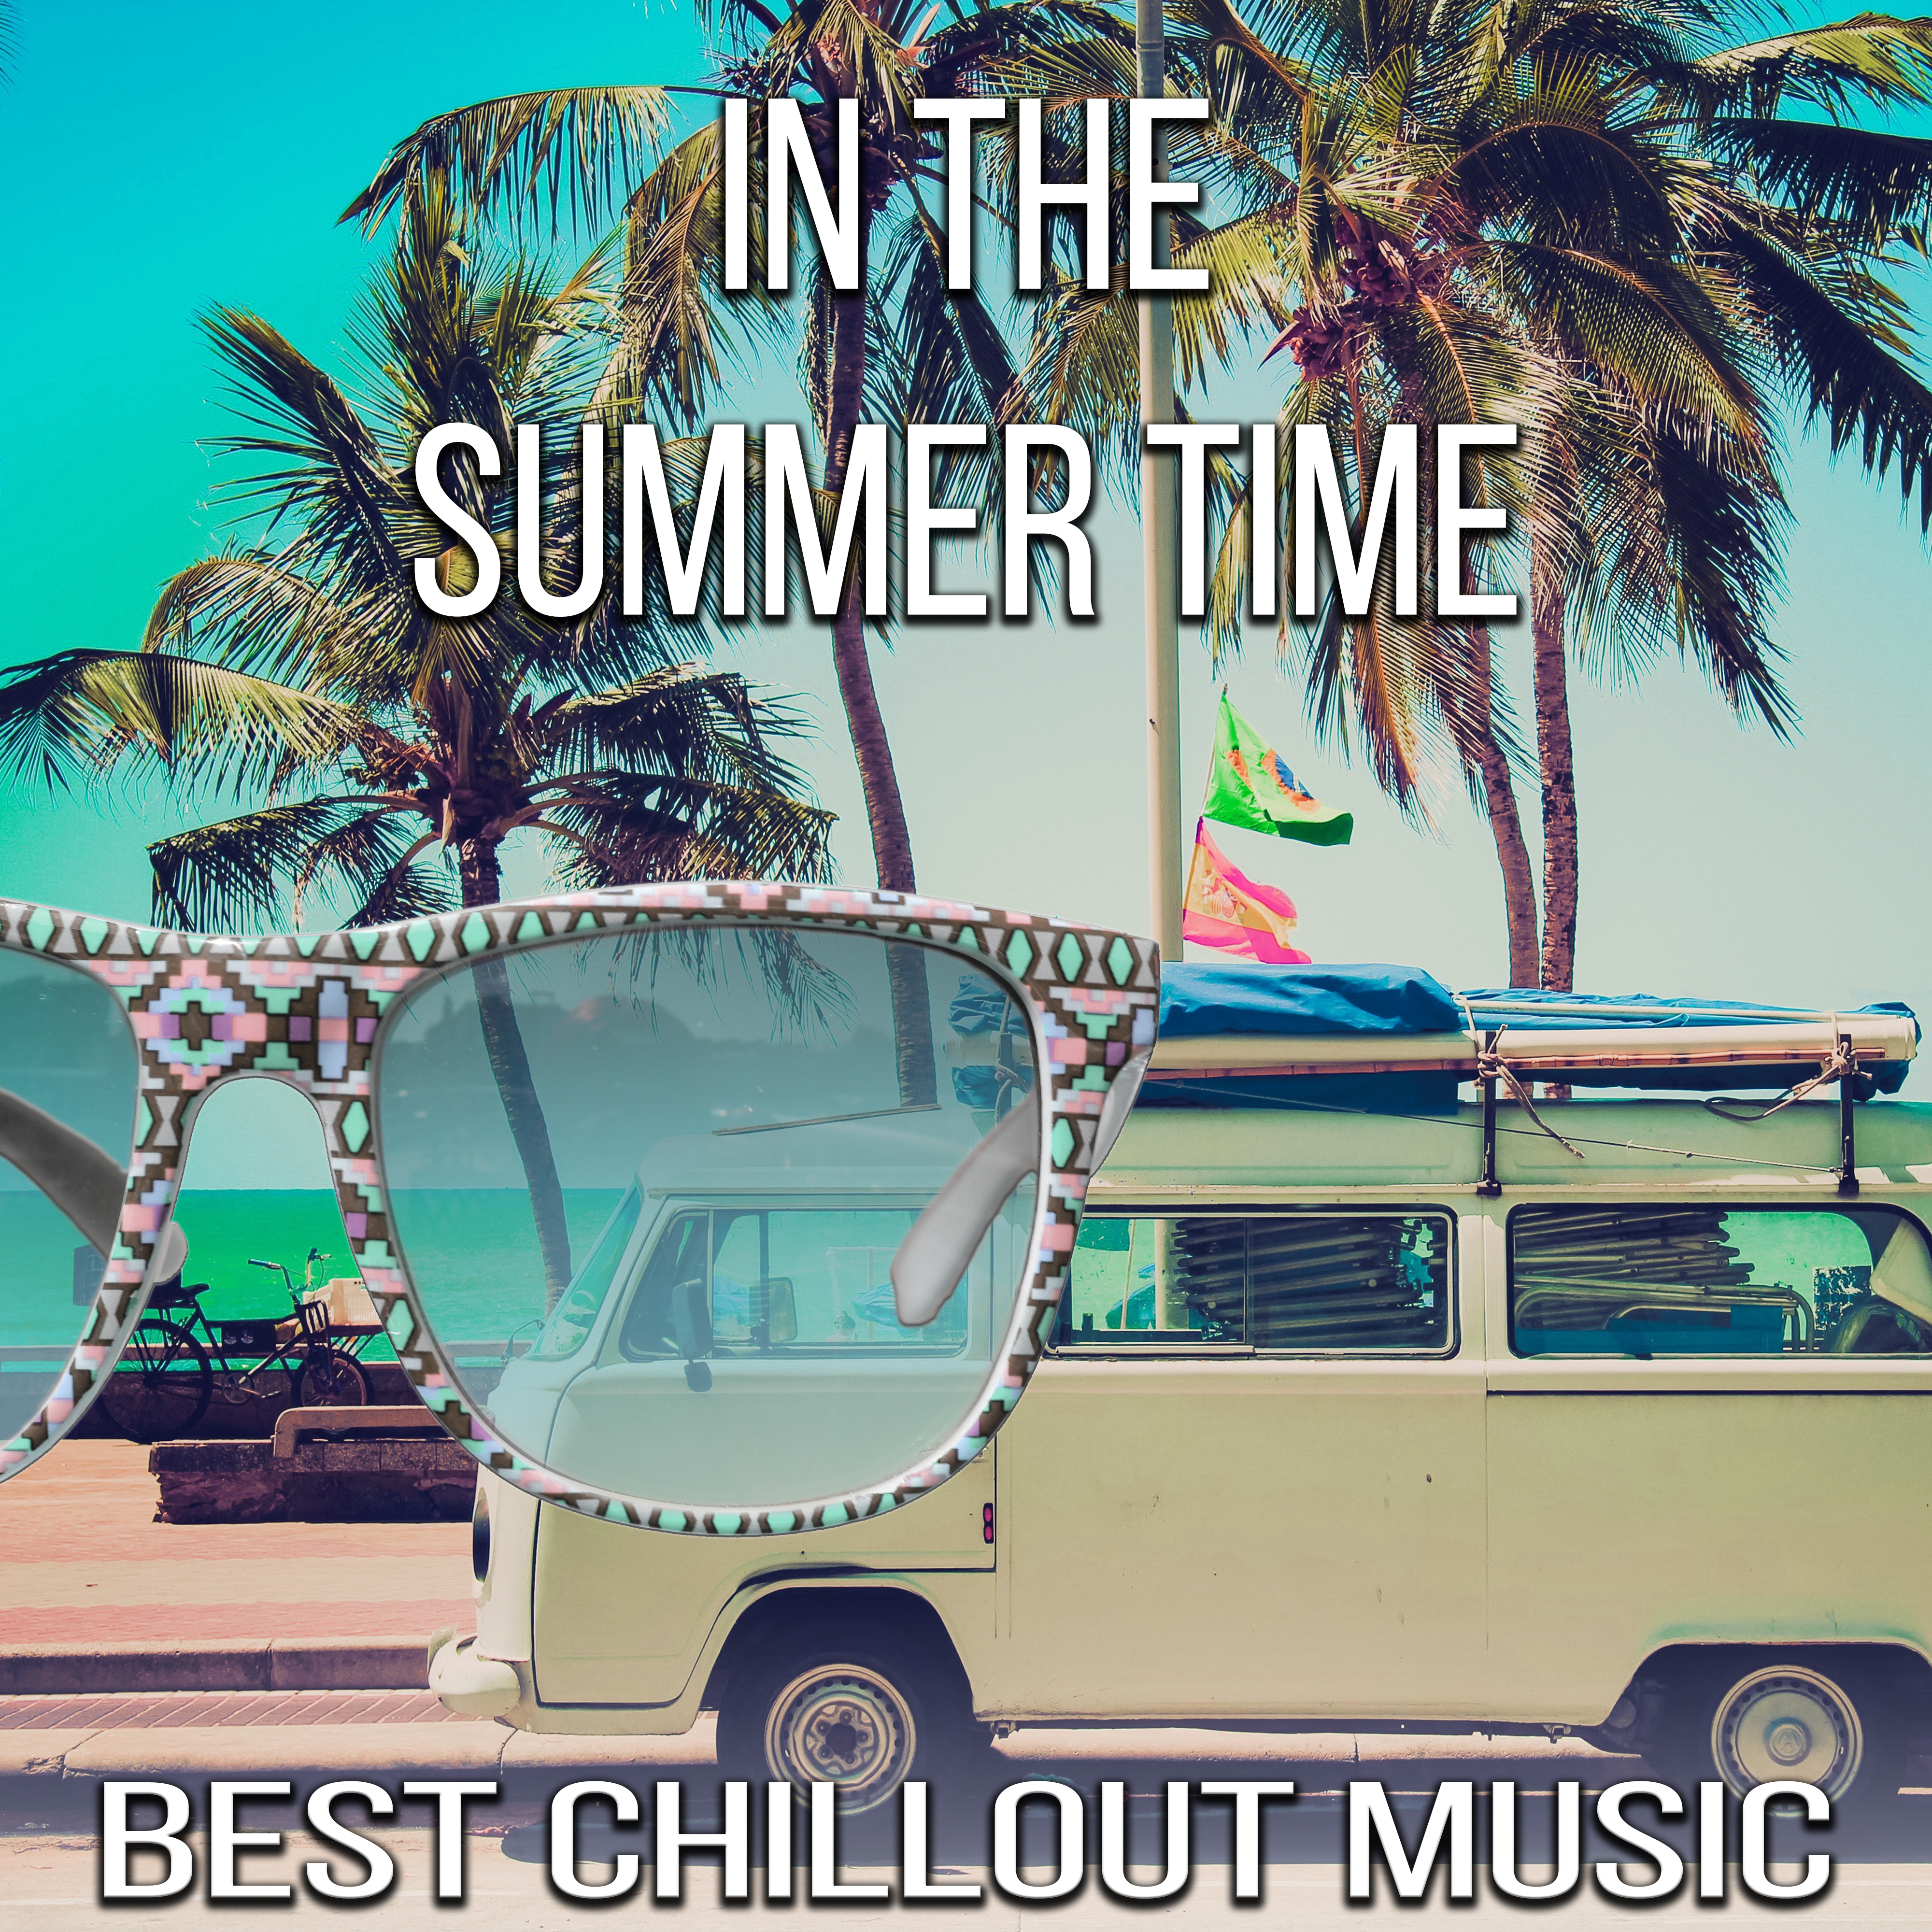 In the Summer Time - Best Chillout Lounge Music, Summertime Chill, Smooth Music for Vacations Drinking Cocktails, Hotel Lobby Drink Bar & Home Bar, Chill Out Sessions, Spring Break